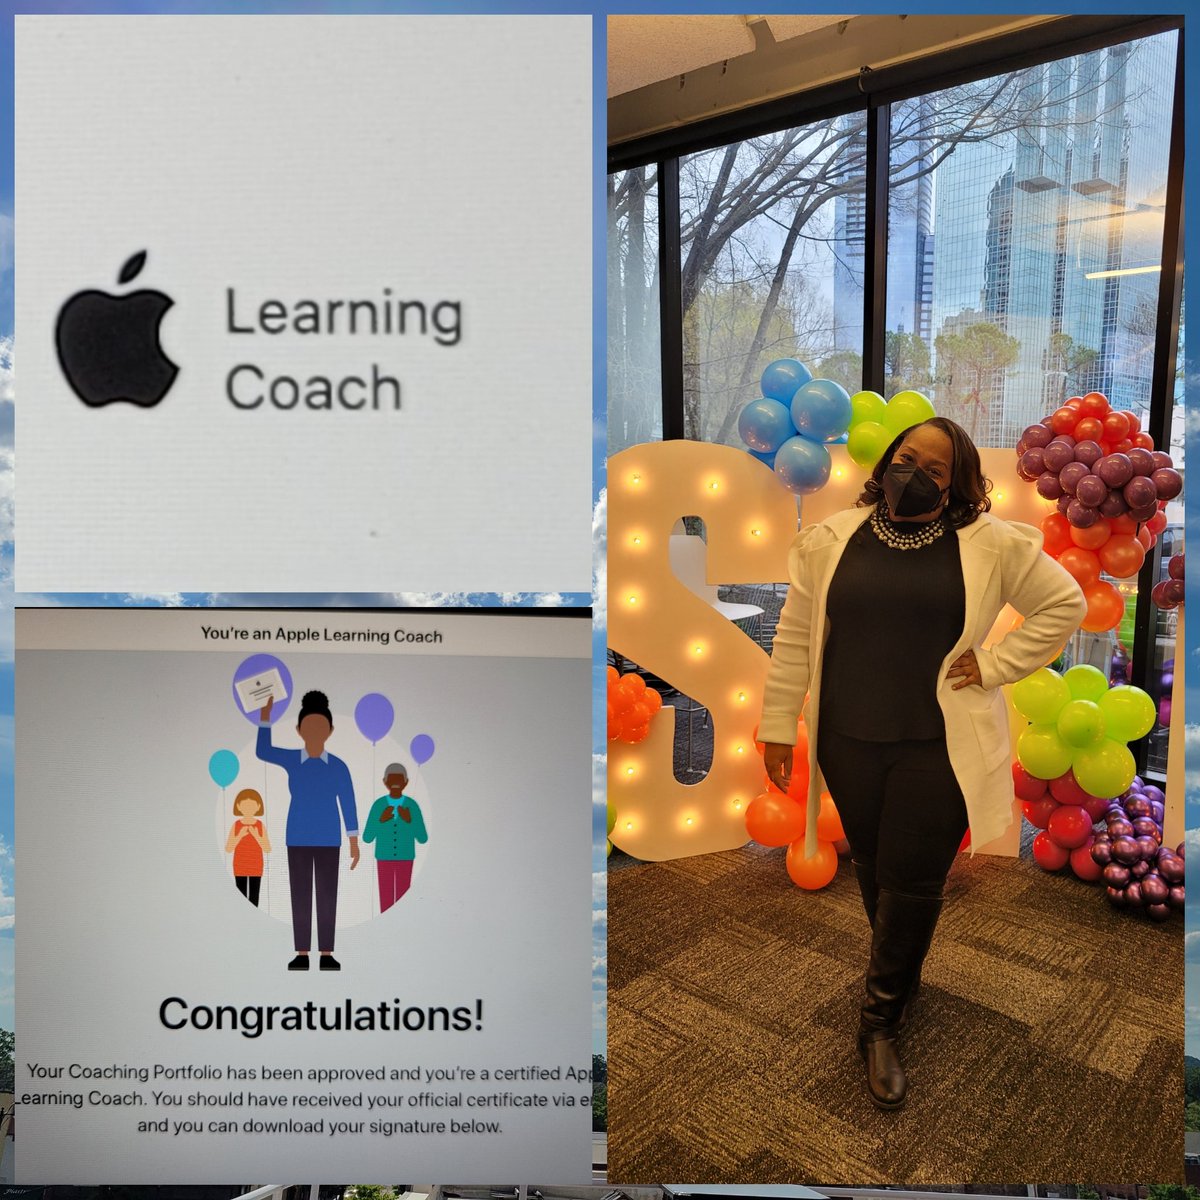 After a super long day of teaching and learning, I checked my email to learn I am officially a certified @AppleEDU Learning Coach!! @apsitnatasha @ahrosser @APSInstructTech @_EdFarm #APSITInspires